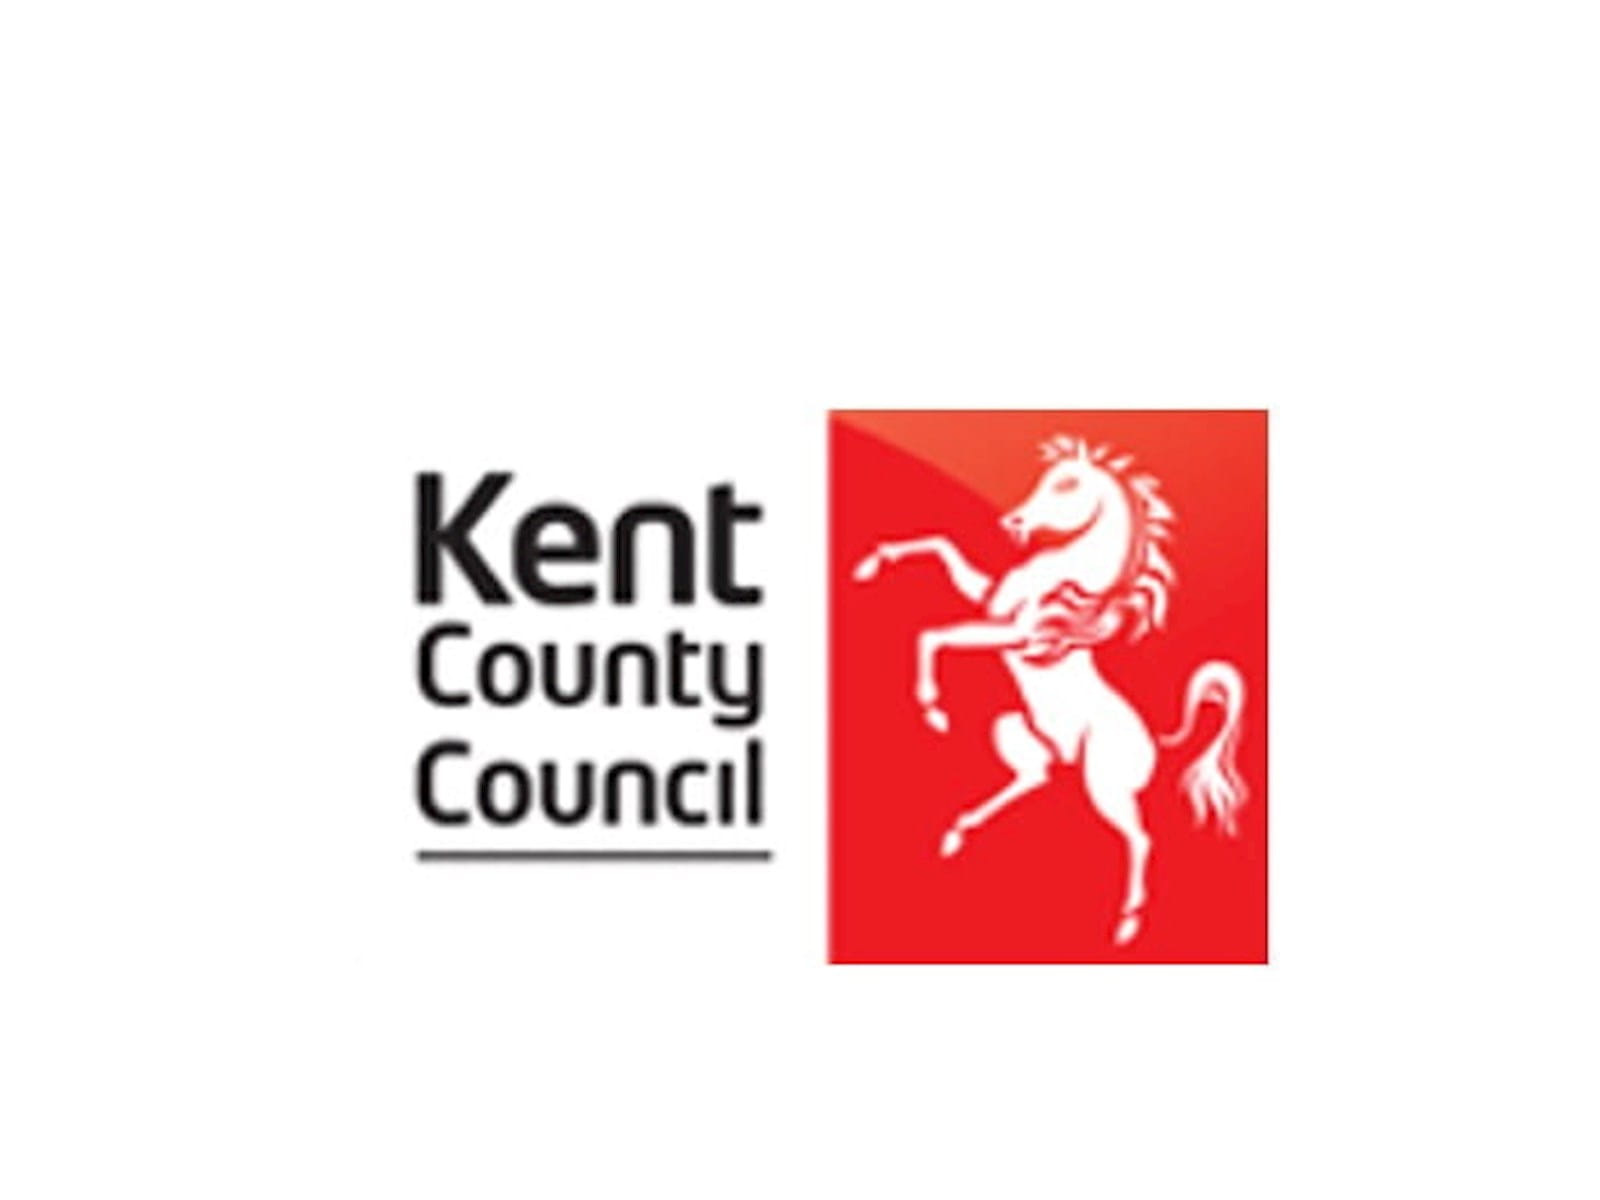 Logo for Kent County Council